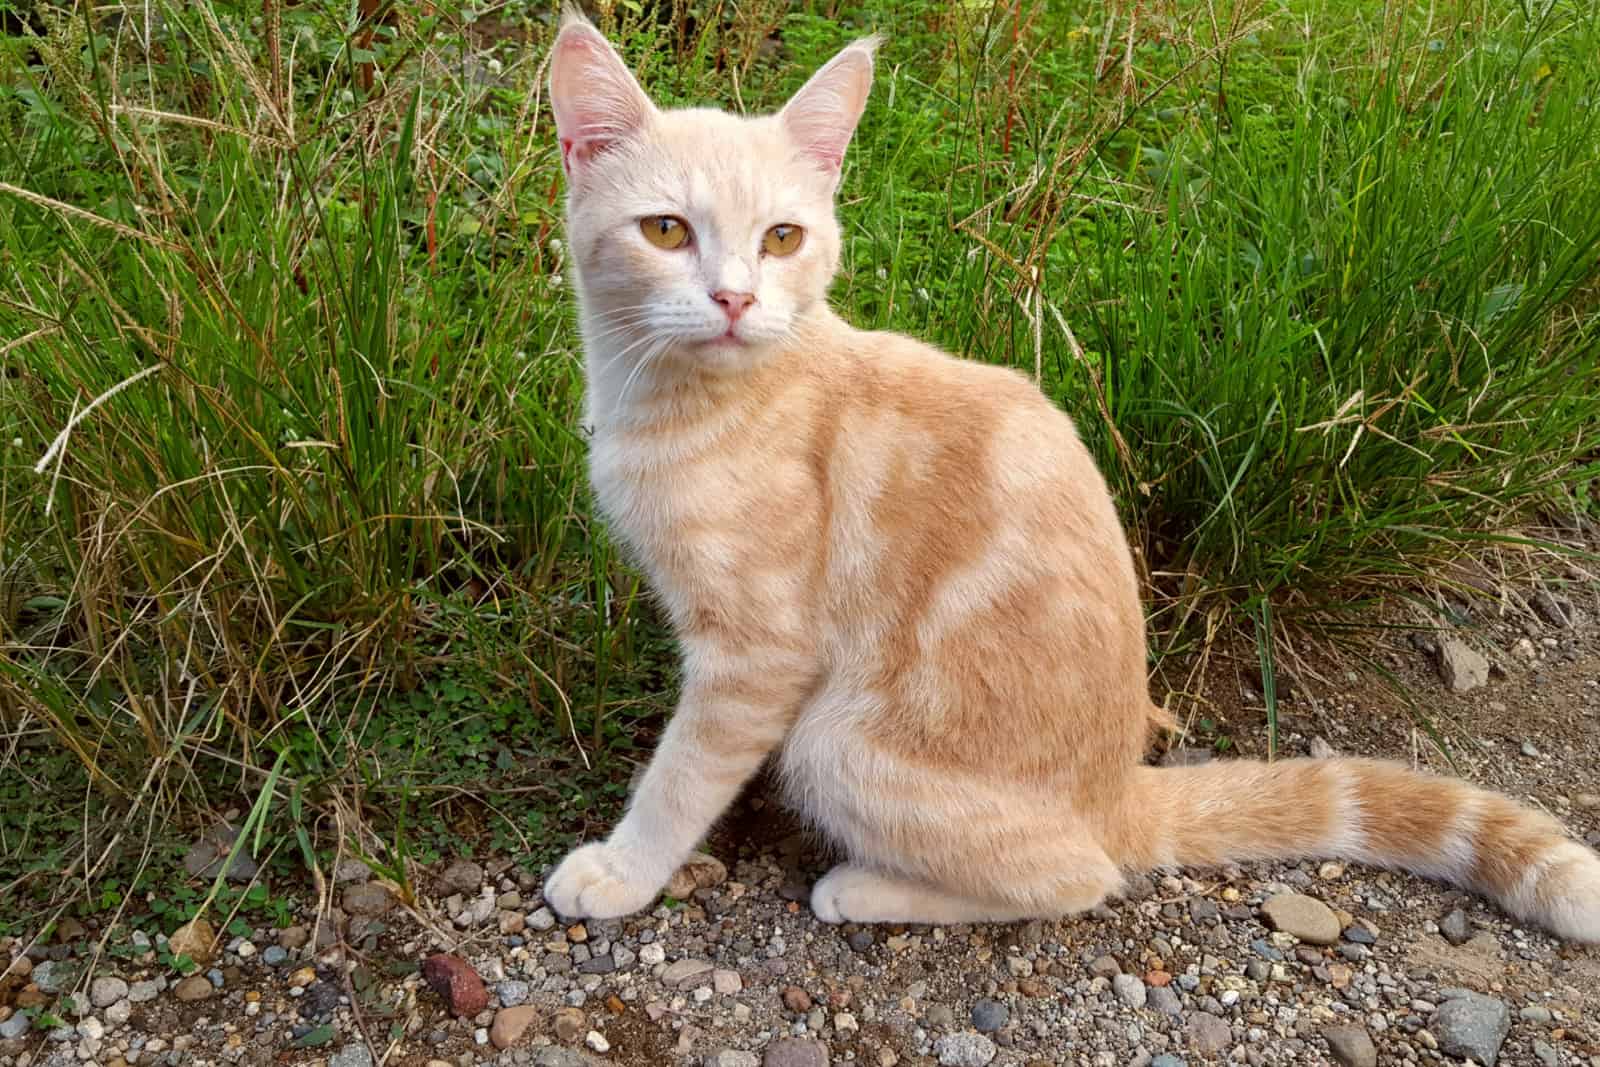 A Javanese cat with white and brown fur and head